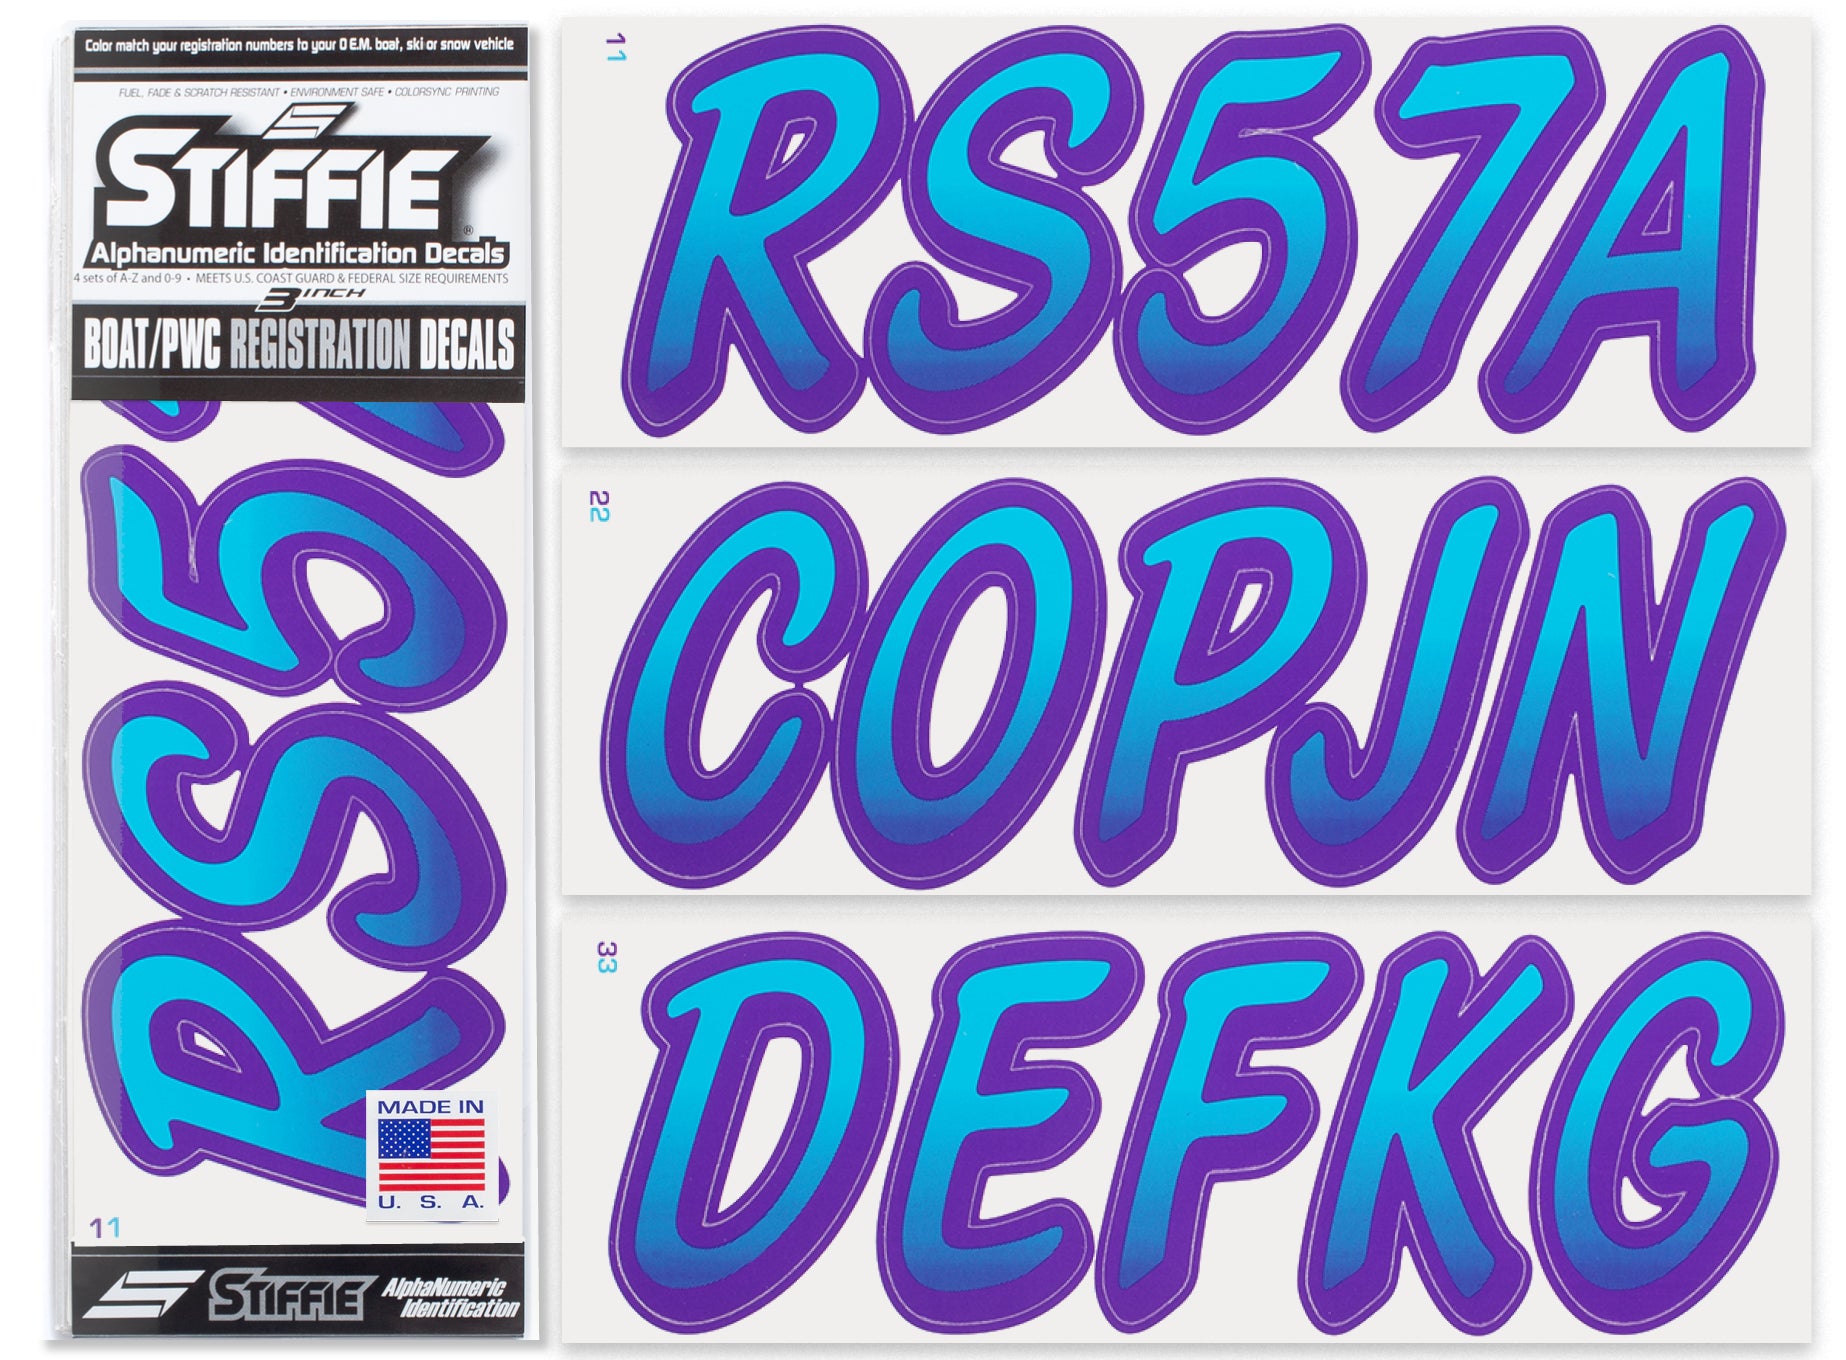 STIFFIE Whipline Sky Blue/Purple 3" Alpha-Numeric Registration Identification Numbers Stickers Decals for Boats & Personal Watercraft